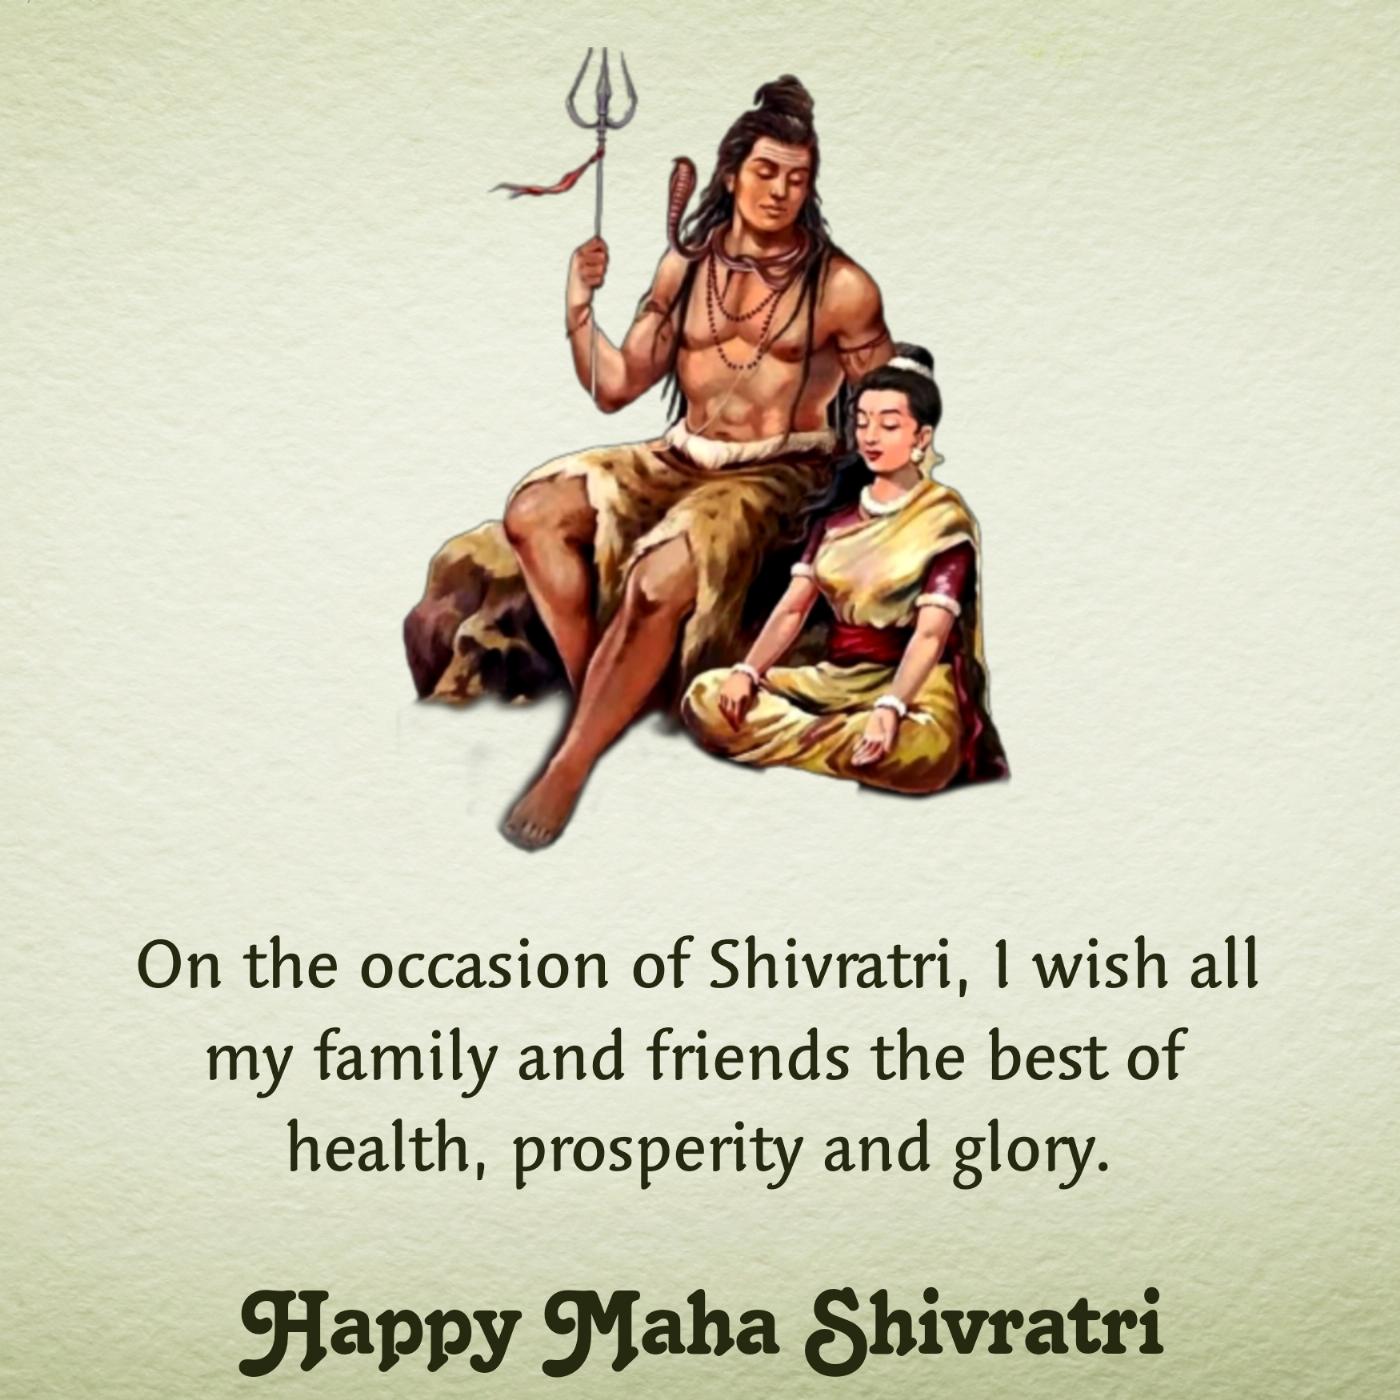 On the occasion of Shivratri I wish all my family and friends